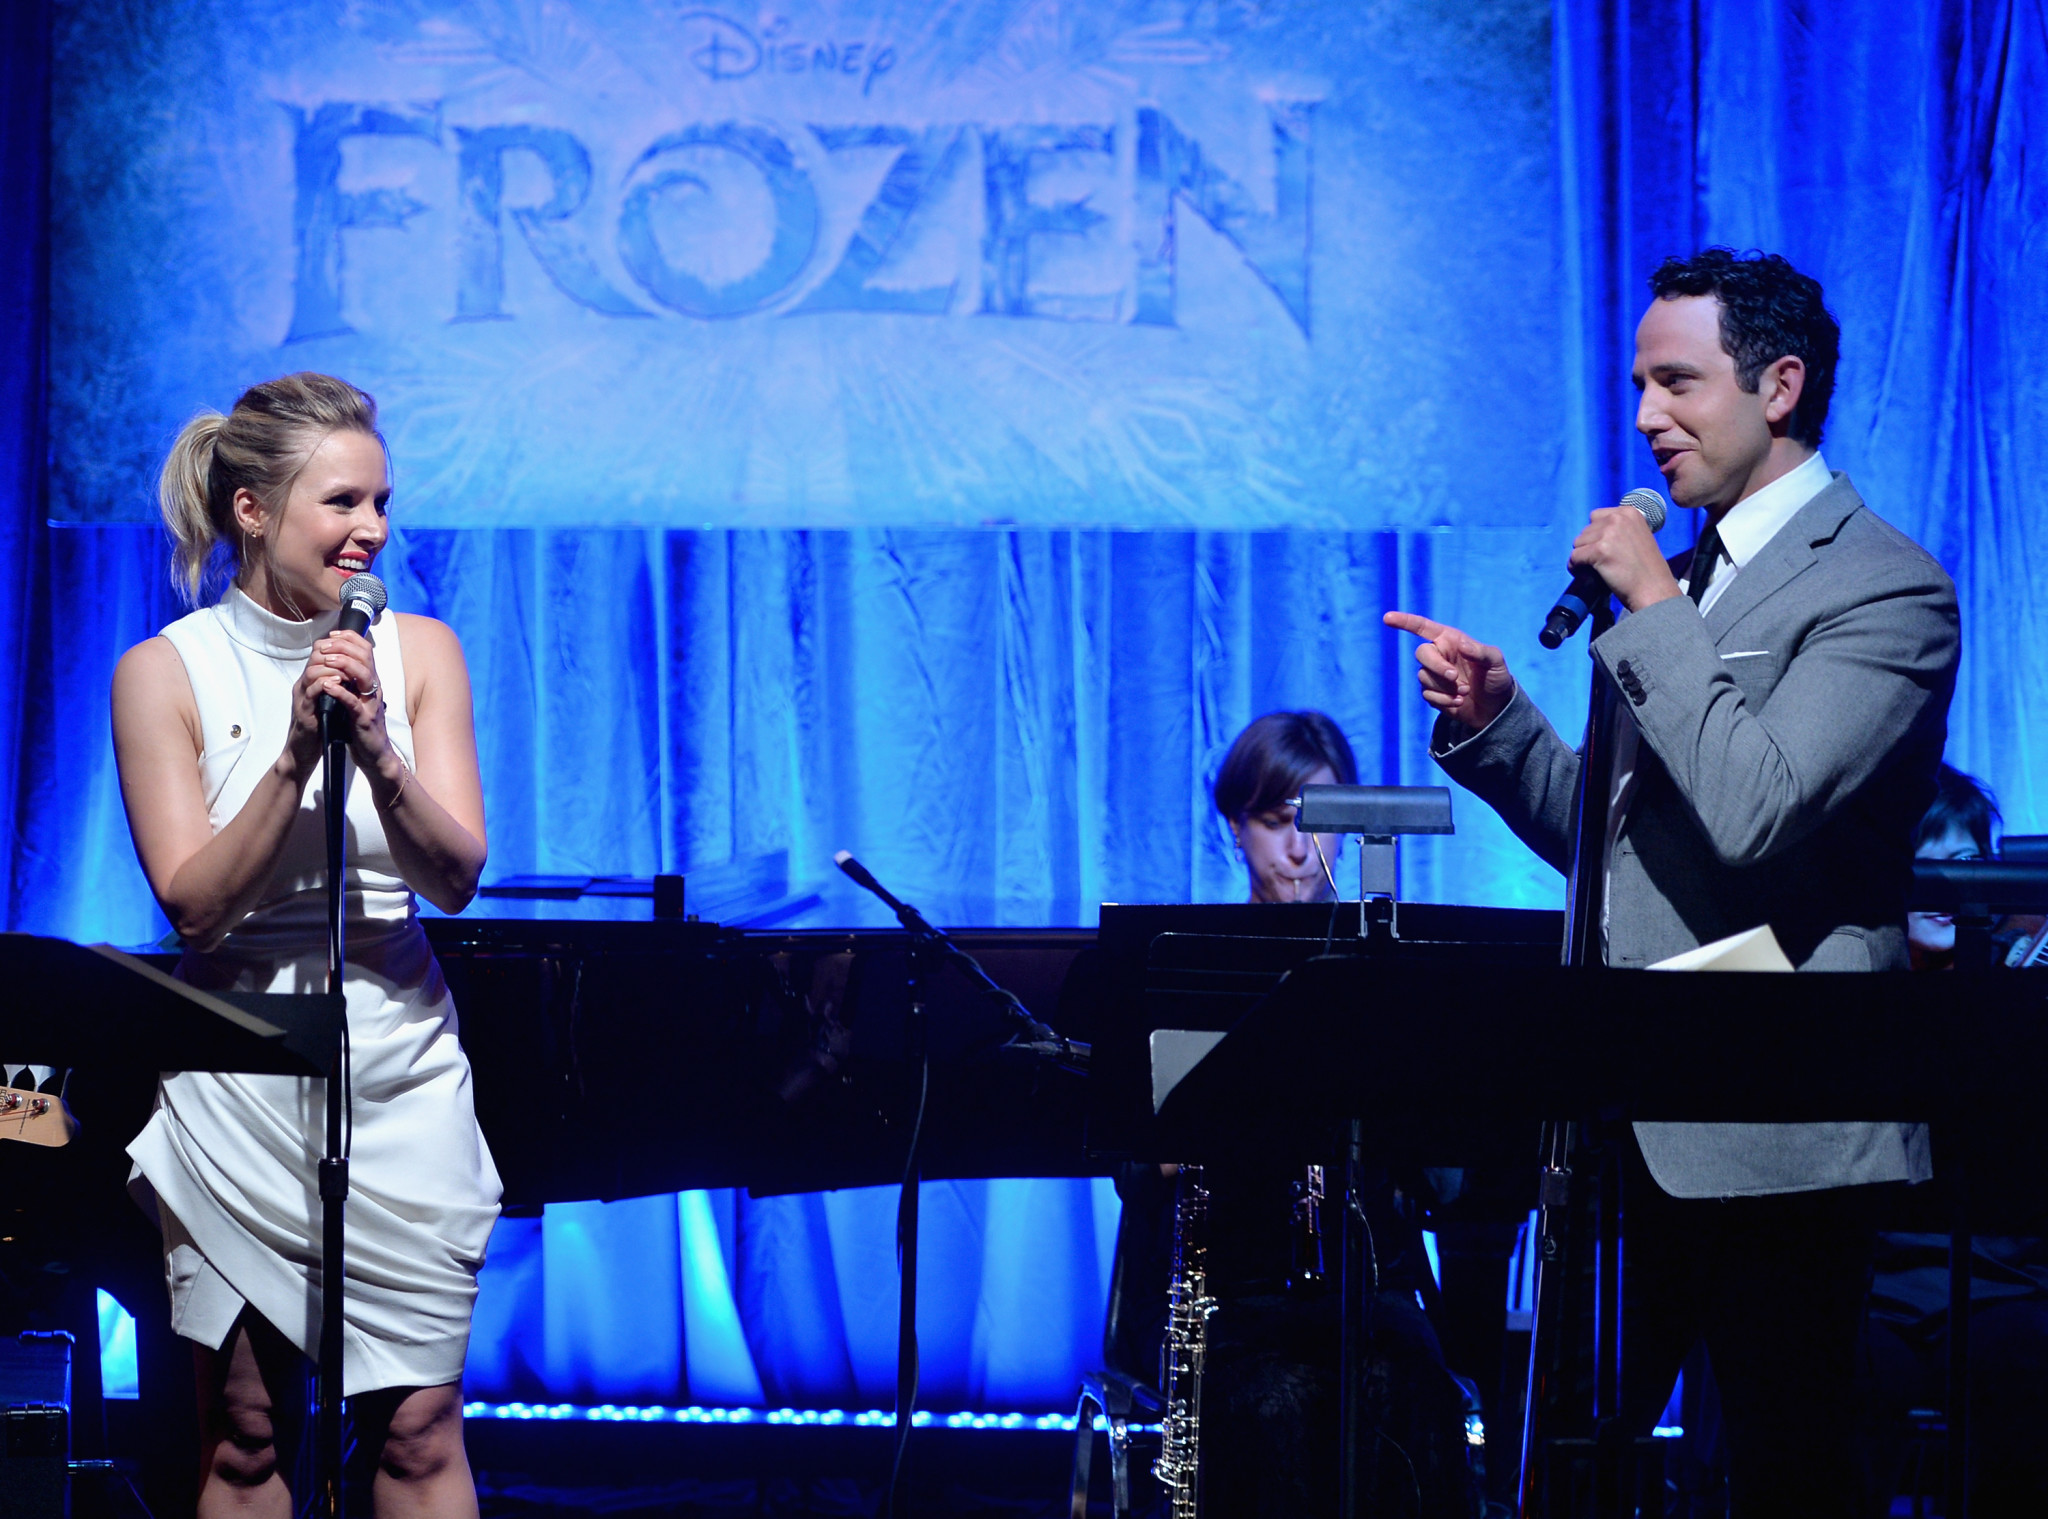 Celebrating The Music Of Frozen with Live performance of Let it Go